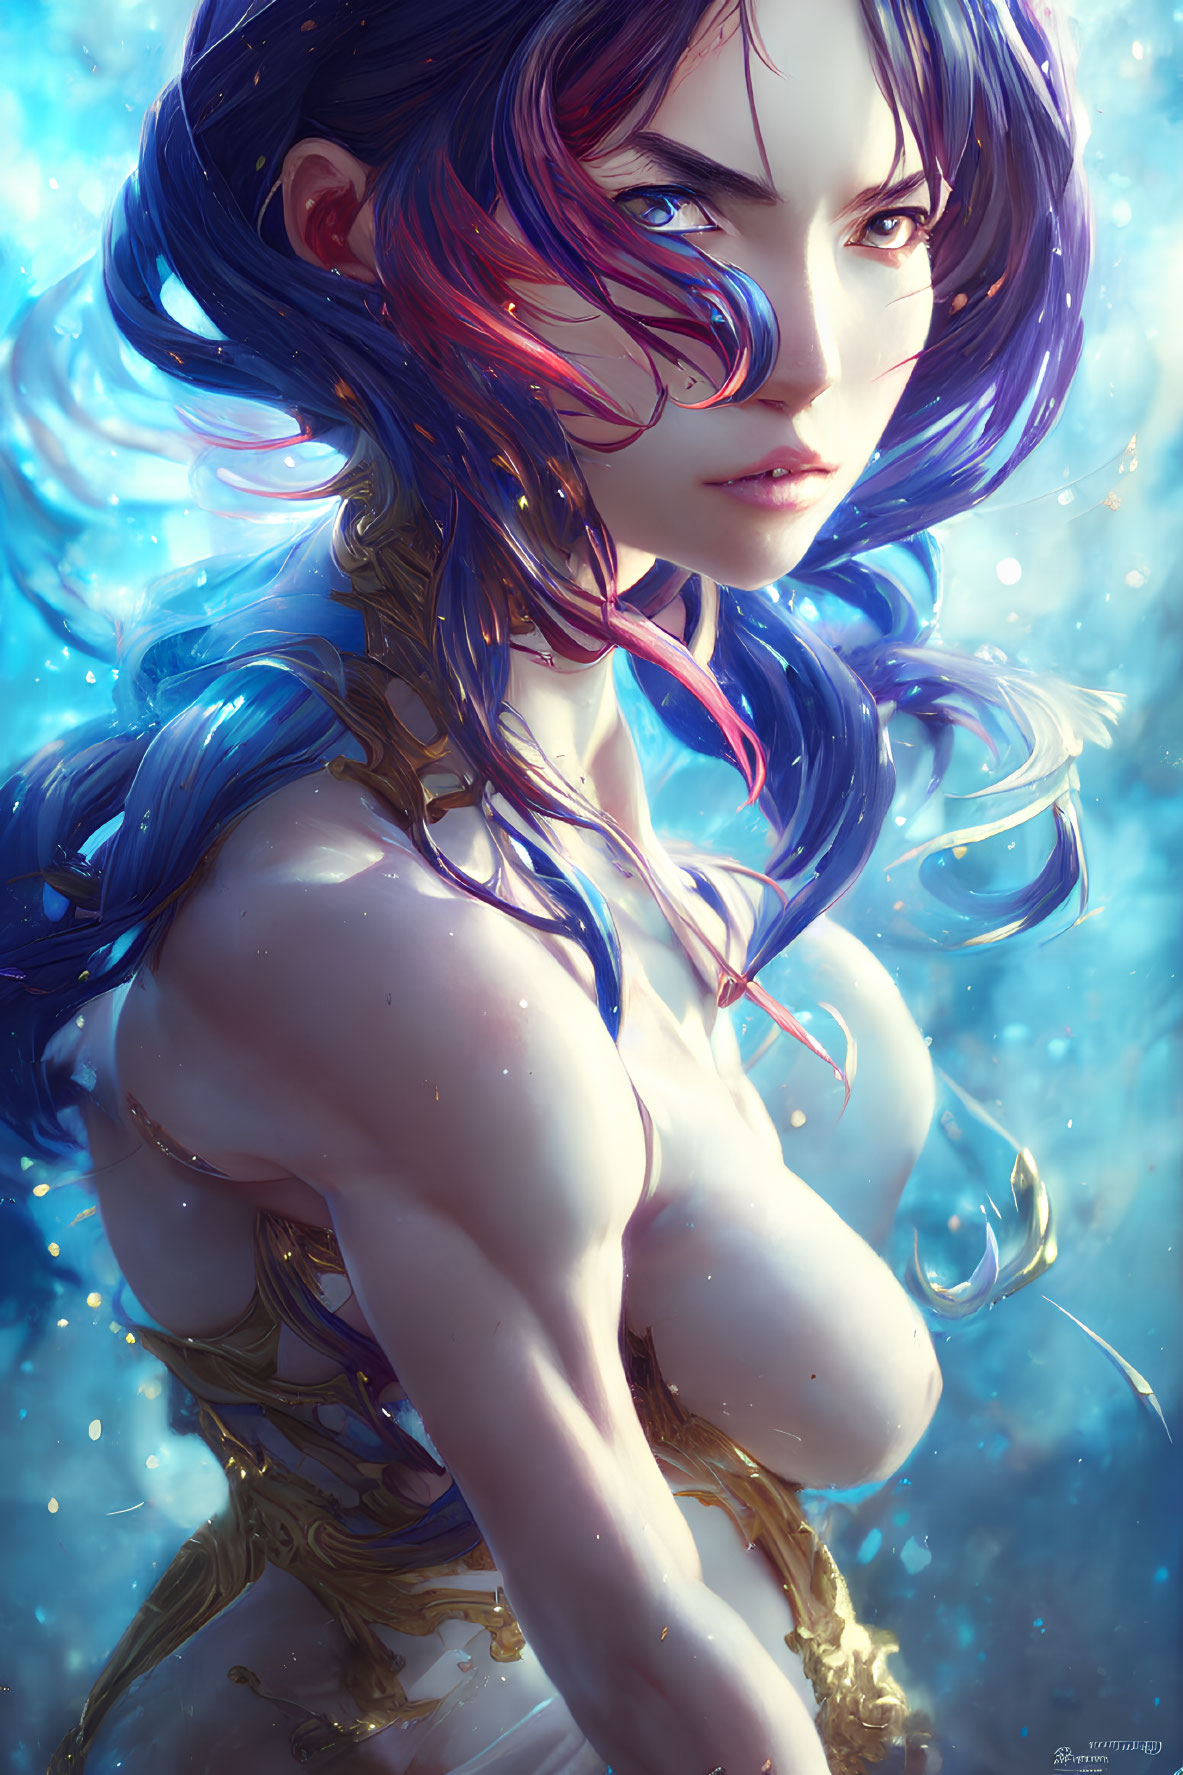 Stylized portrait of woman with blue and purple hair and water droplets.